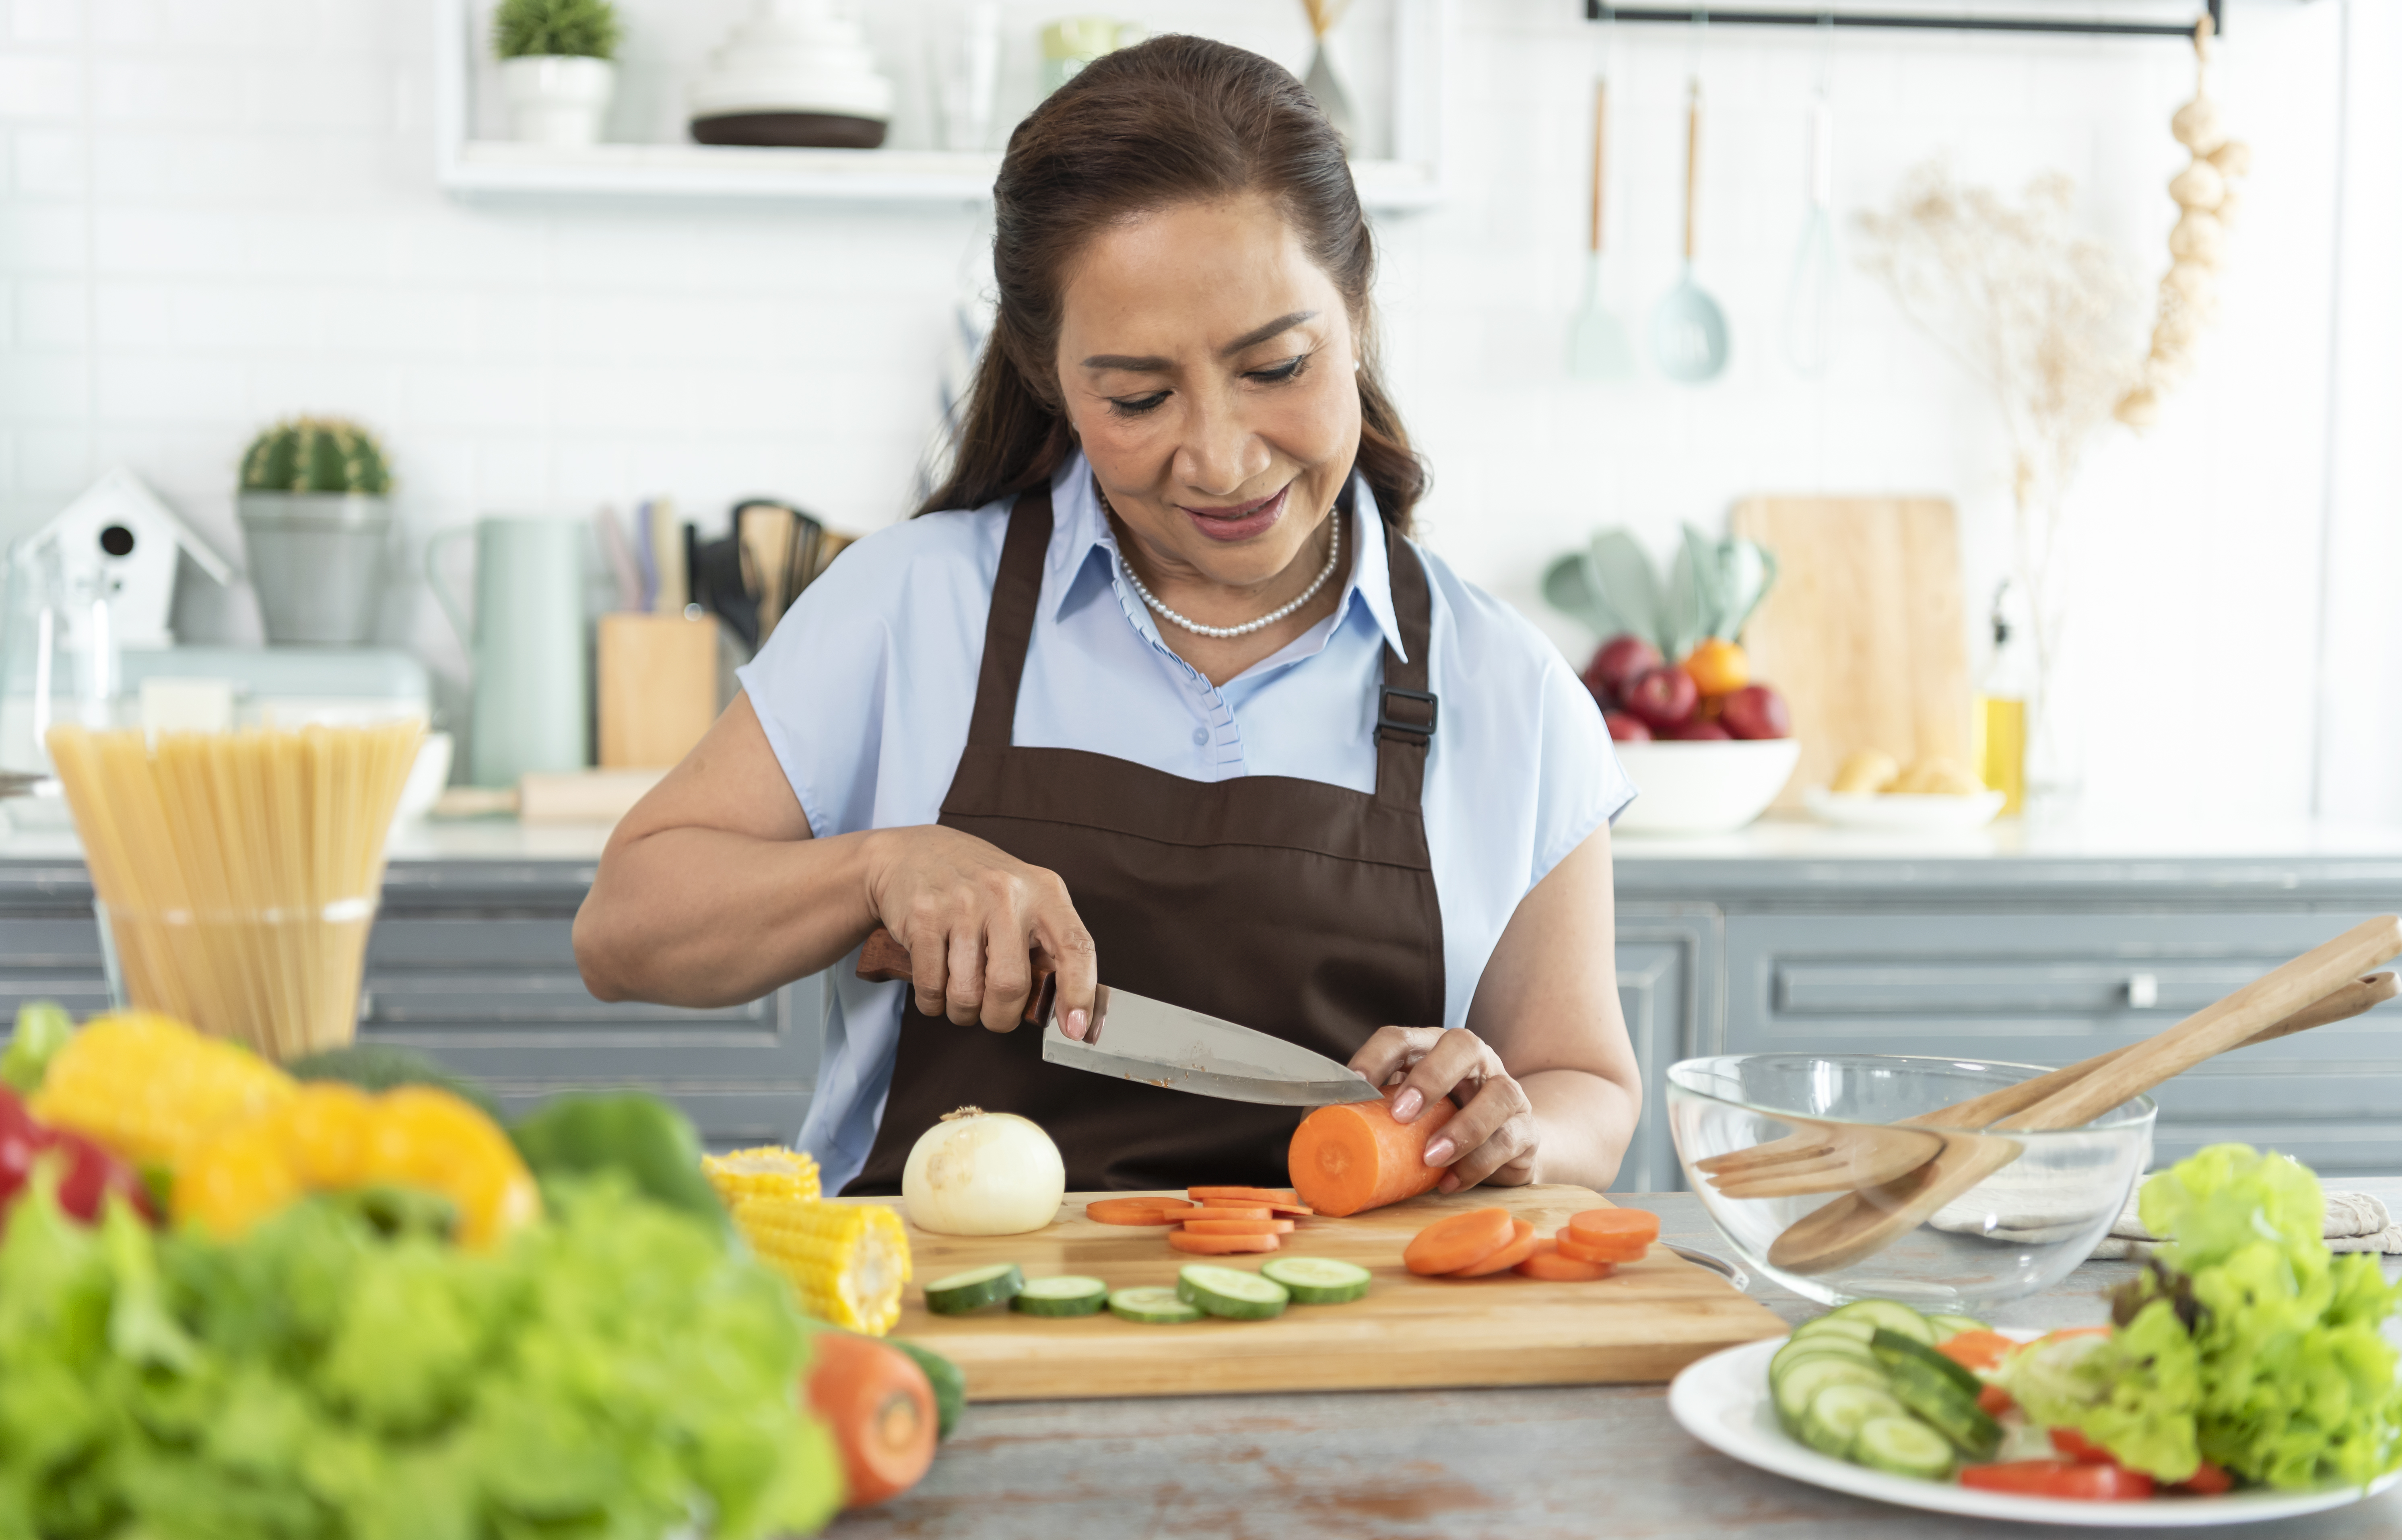 https://img.moneyduck.com/article_attachment/1664875378-happy-smiling-asian-older-woman-apron-cut-vegetables-while-cooking-salad-kitchen.jpg